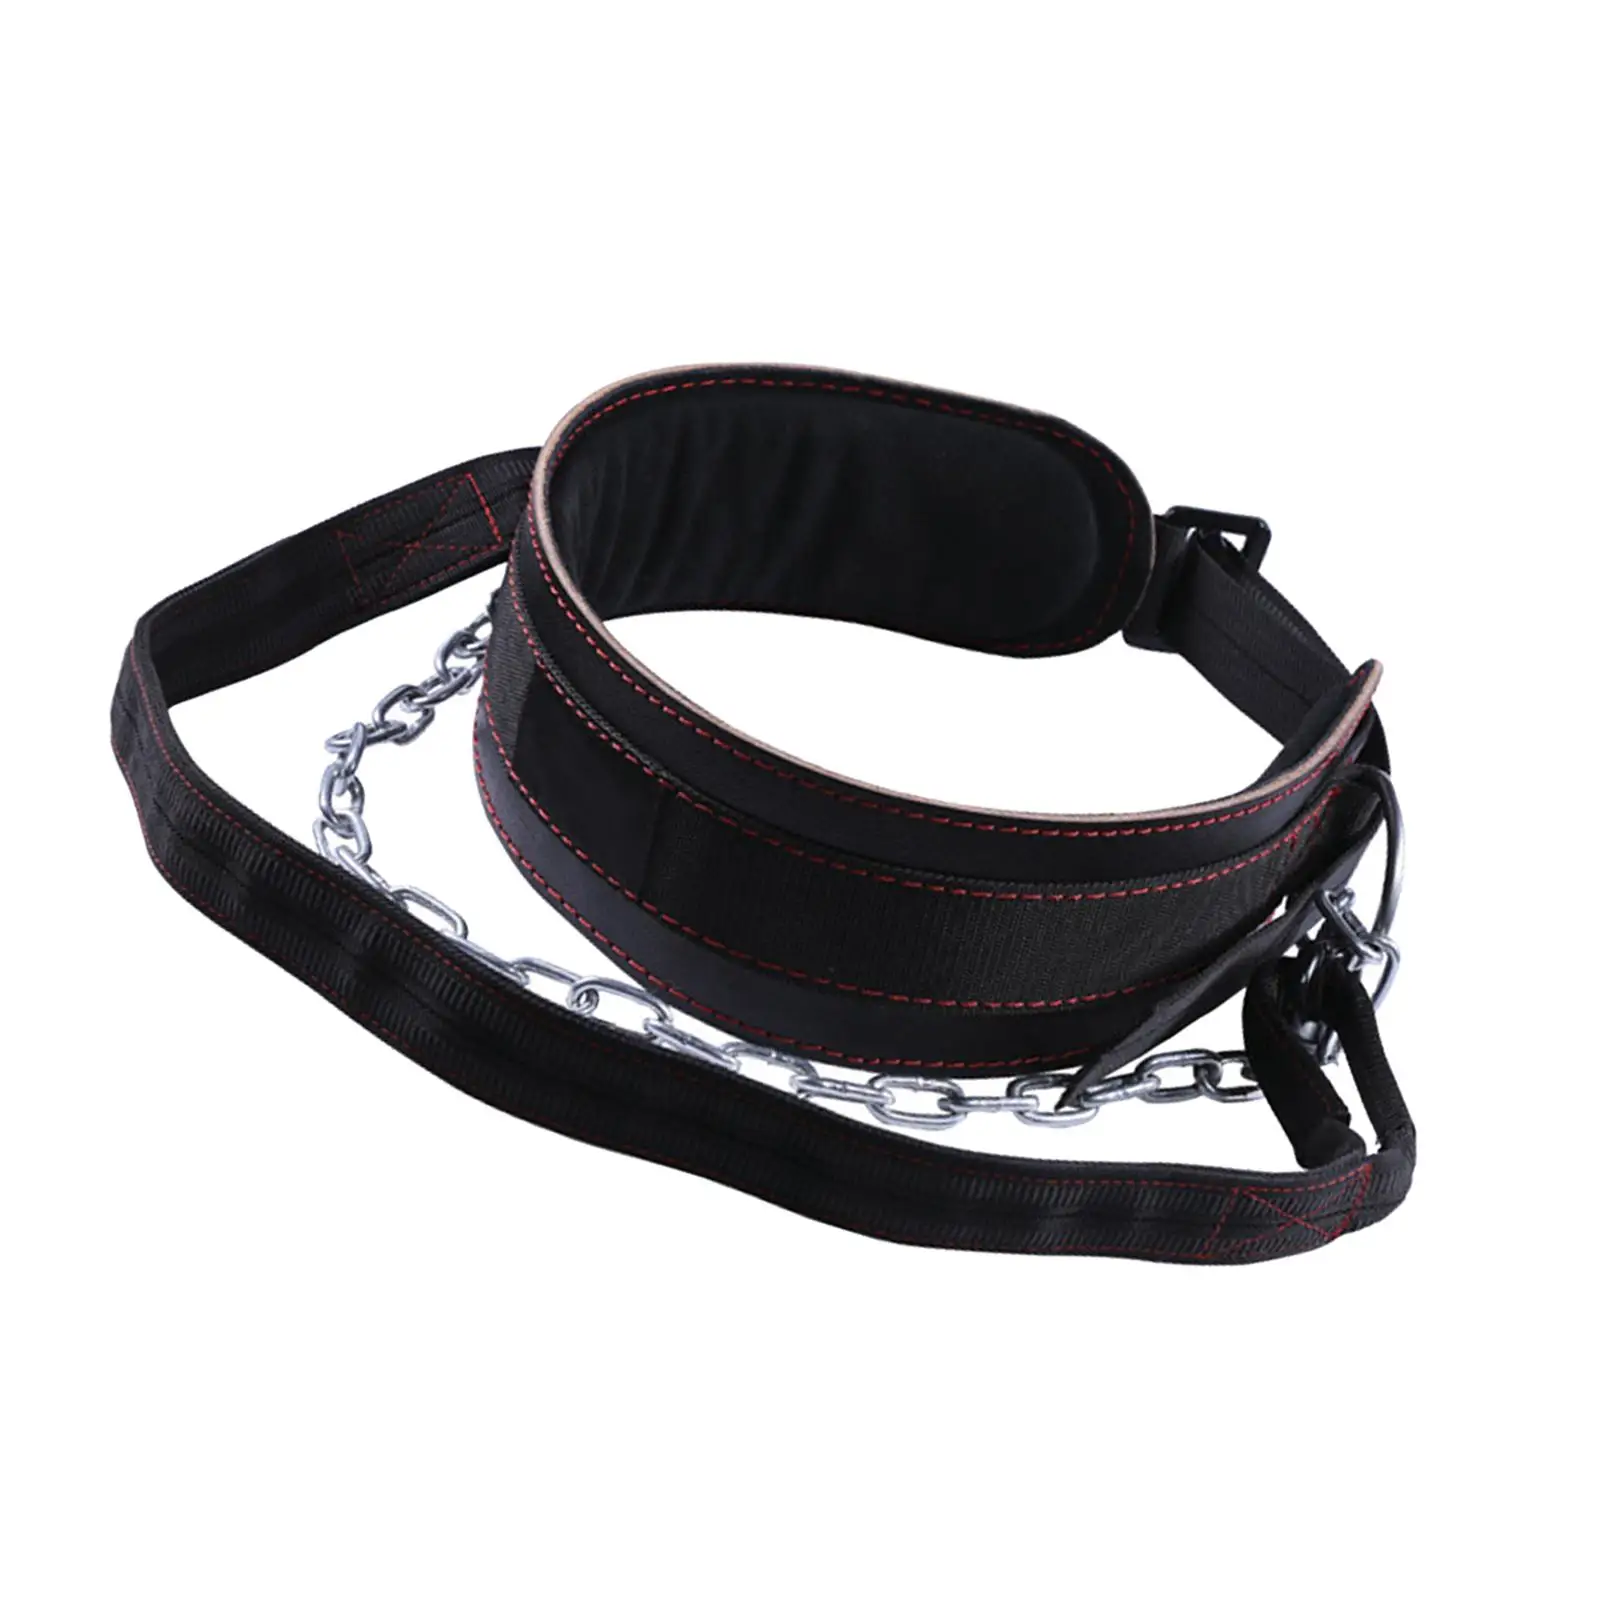 PU Dip Belt with Metal Chain Chin Workout Multifunction Adjustable Chain Lifting Belt for Weight Lifting Bodybuilding Training